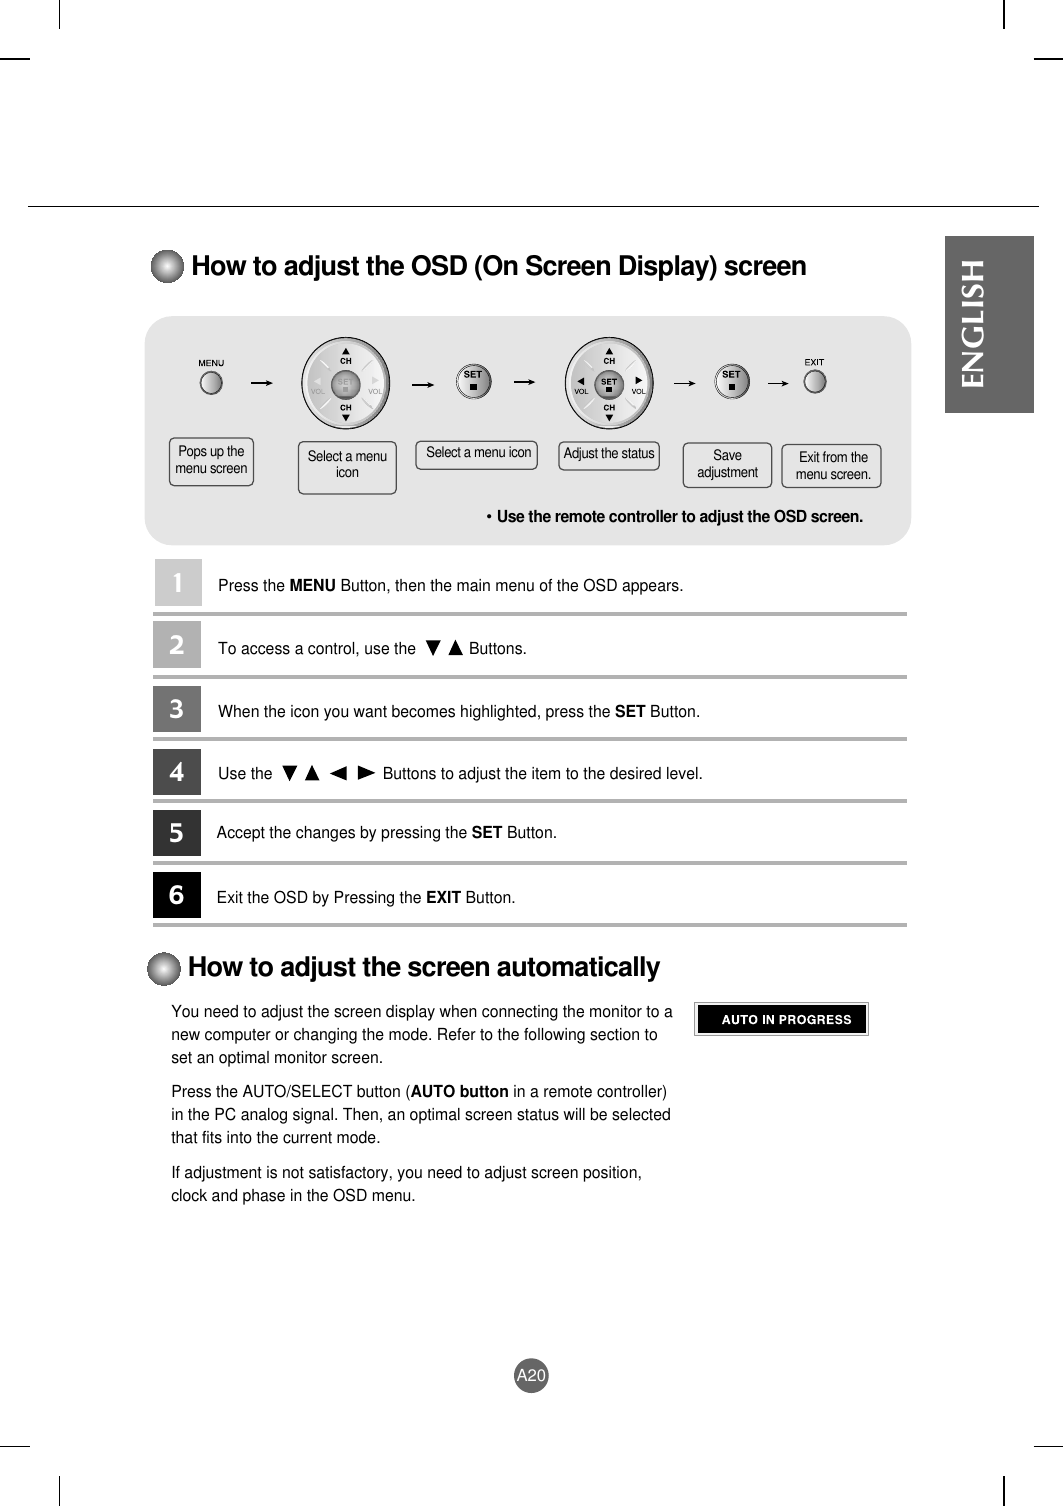 A20ENGLISHHow to adjust the OSD (On Screen Display) screen• Use the remote controller to adjust the OSD screen.How to adjust the screen automaticallyYou need to adjust the screen display when connecting the monitor to anew computer or changing the mode. Refer to the following section toset an optimal monitor screen.Press the AUTO/SELECT button (AUTO button in a remote controller)in the PC analog signal. Then, an optimal screen status will be selectedthat fits into the current mode.If adjustment is not satisfactory, you need to adjust screen position,clock and phase in the OSD menu.Pops up themenu screen Select a menuiconSelect a menu icon Adjust the status Saveadjustment Exit from themenu screen.Press the MENU Button, then the main menu of the OSD appears.To access a control, use the            Buttons. When the icon you want becomes highlighted, press the SET Button.Use the                         Buttons to adjust the item to the desired level.Accept the changes by pressing the SET Button.Exit the OSD by Pressing the EXIT Button.123456